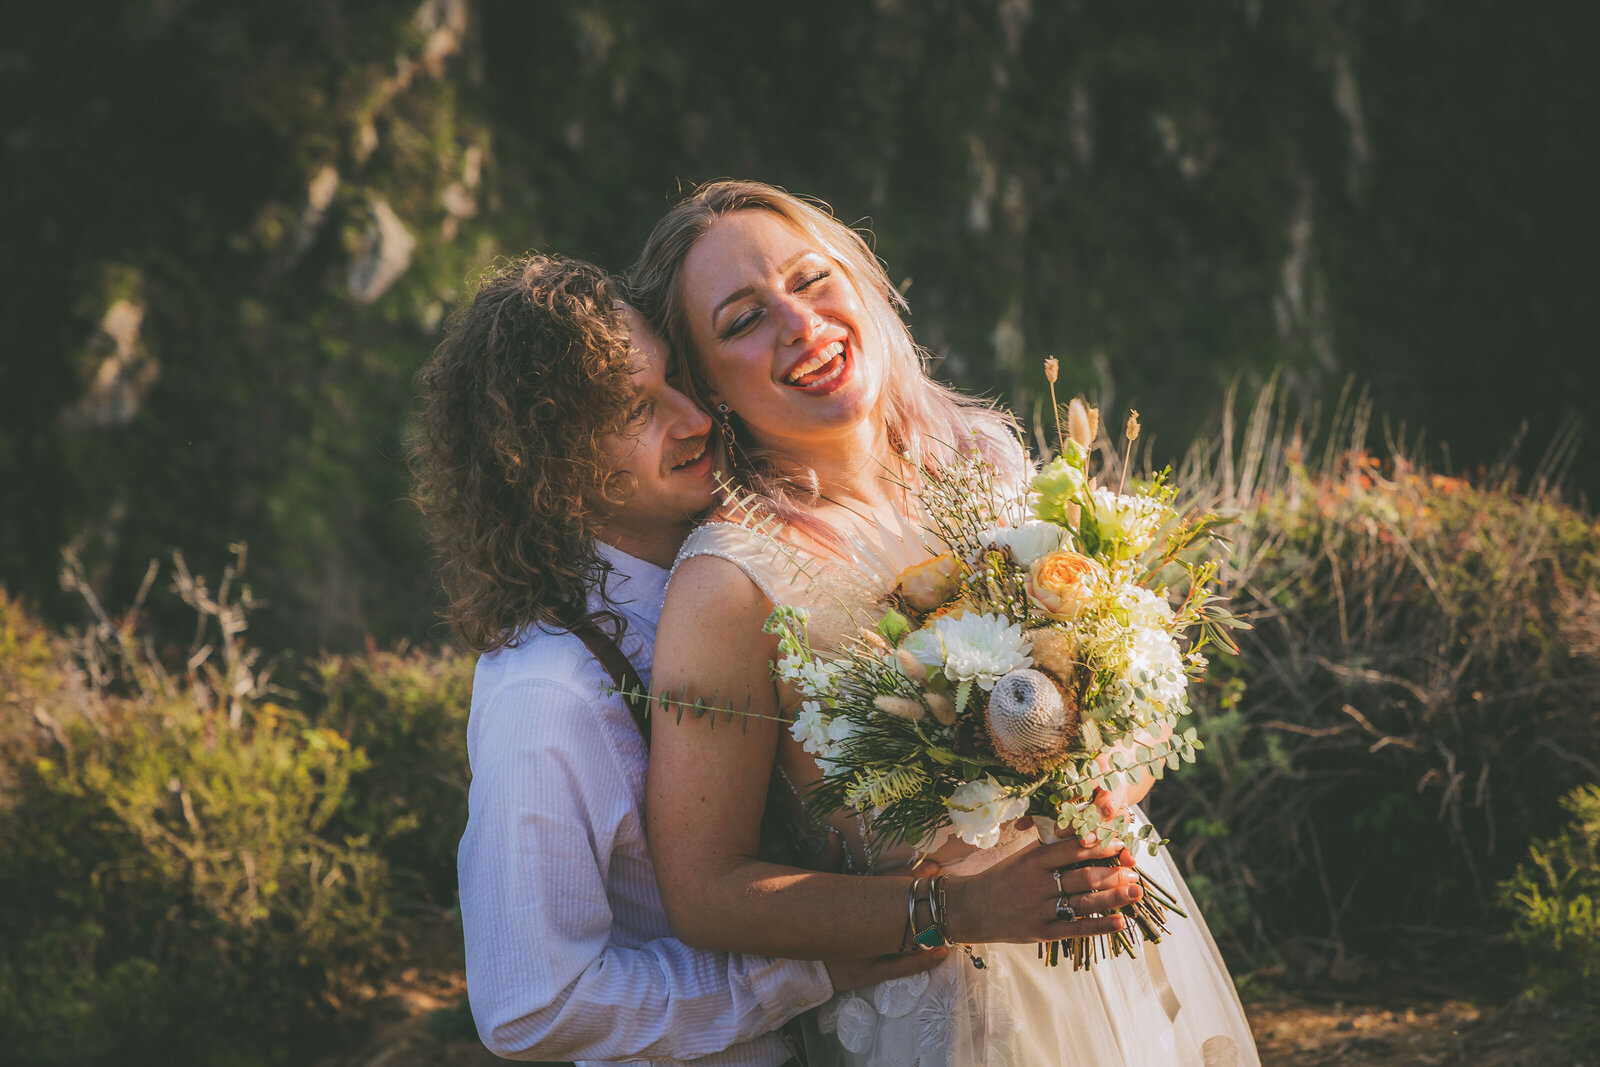 A groom whispers something funny to a bride during their Bixby Bridge portrait session.